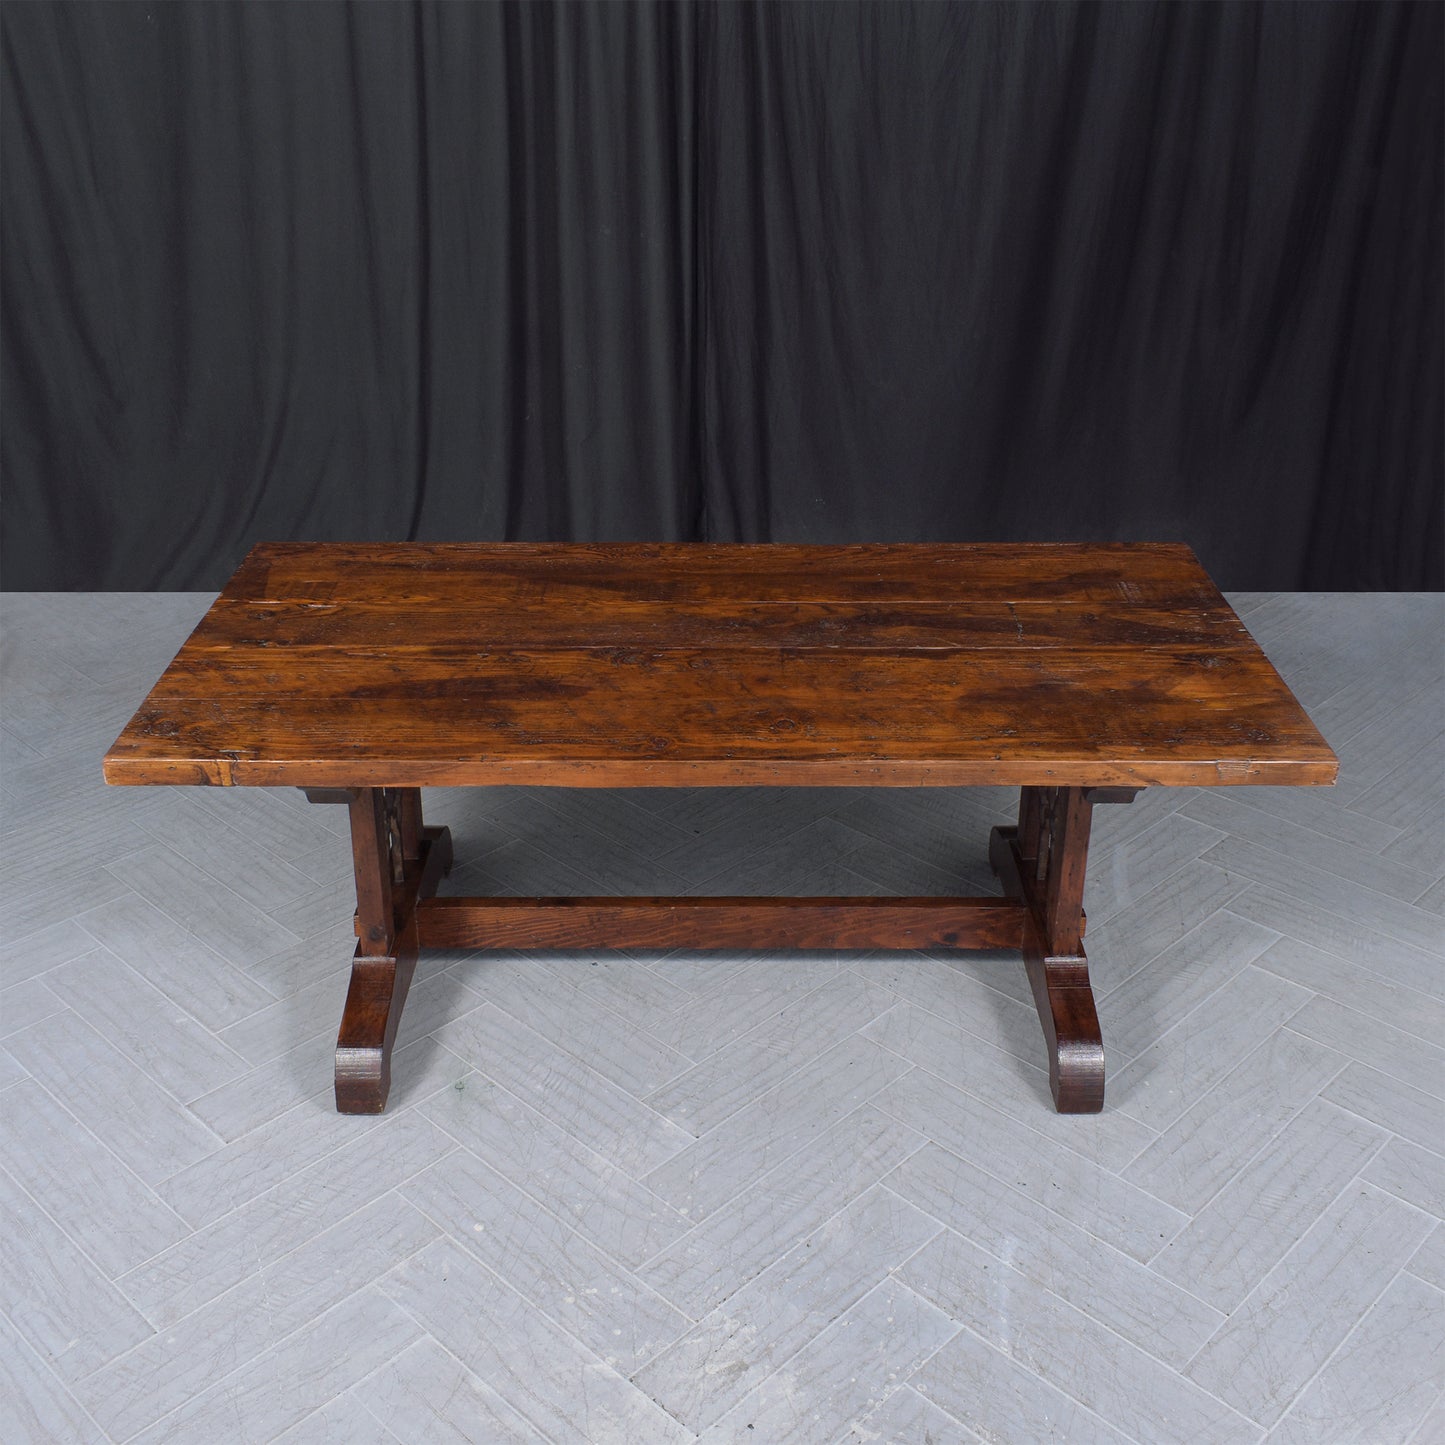 Vintage Solid Wood Dining Table: Handcrafted Elegance with Modern Design Accents